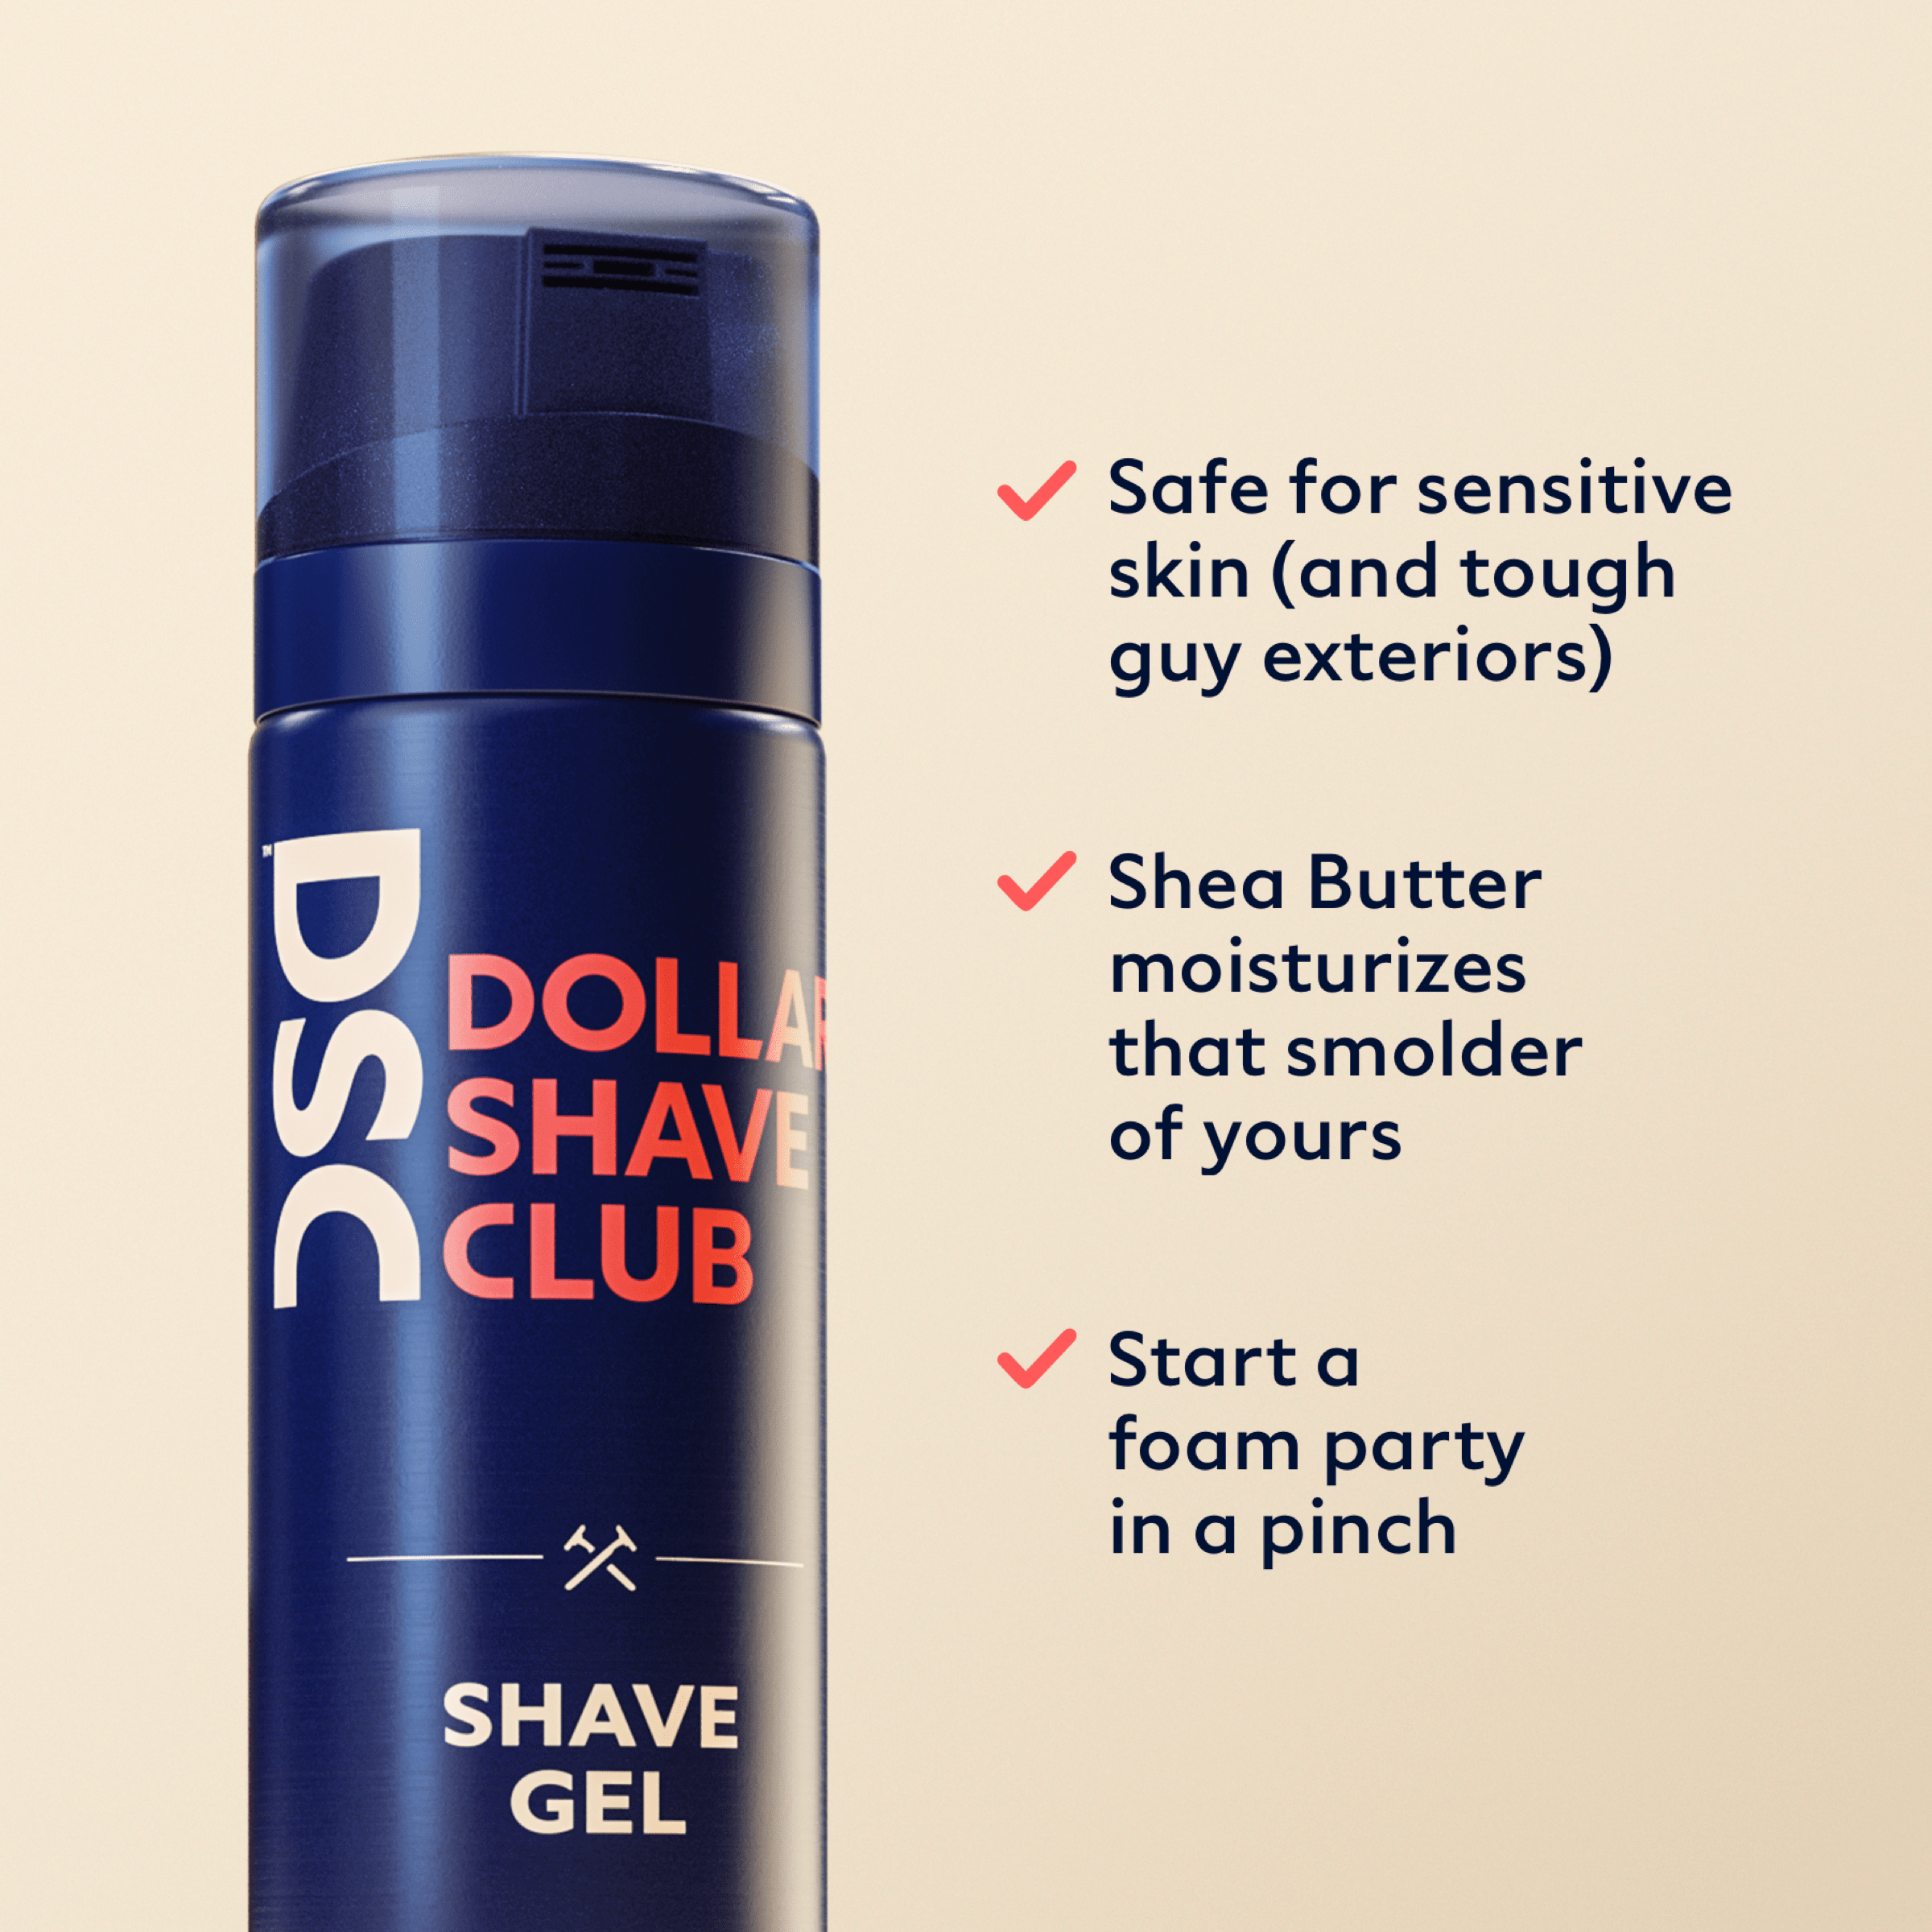 Dollar Shave Club Shave Gel is great for sensitive skin, foams nicely, and is made with shea butter.